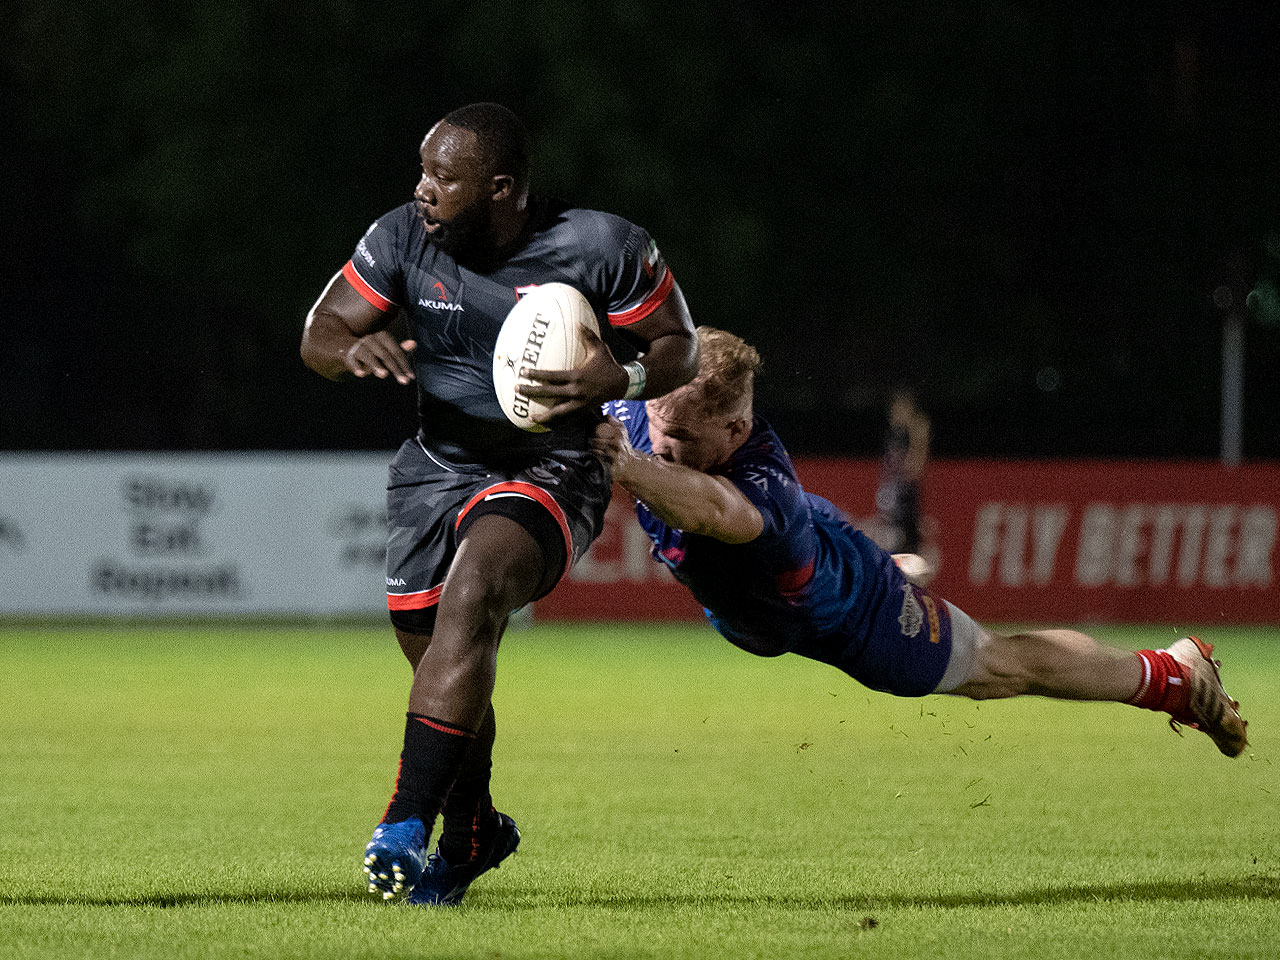 Brad Owako on the charge with a rugby ball